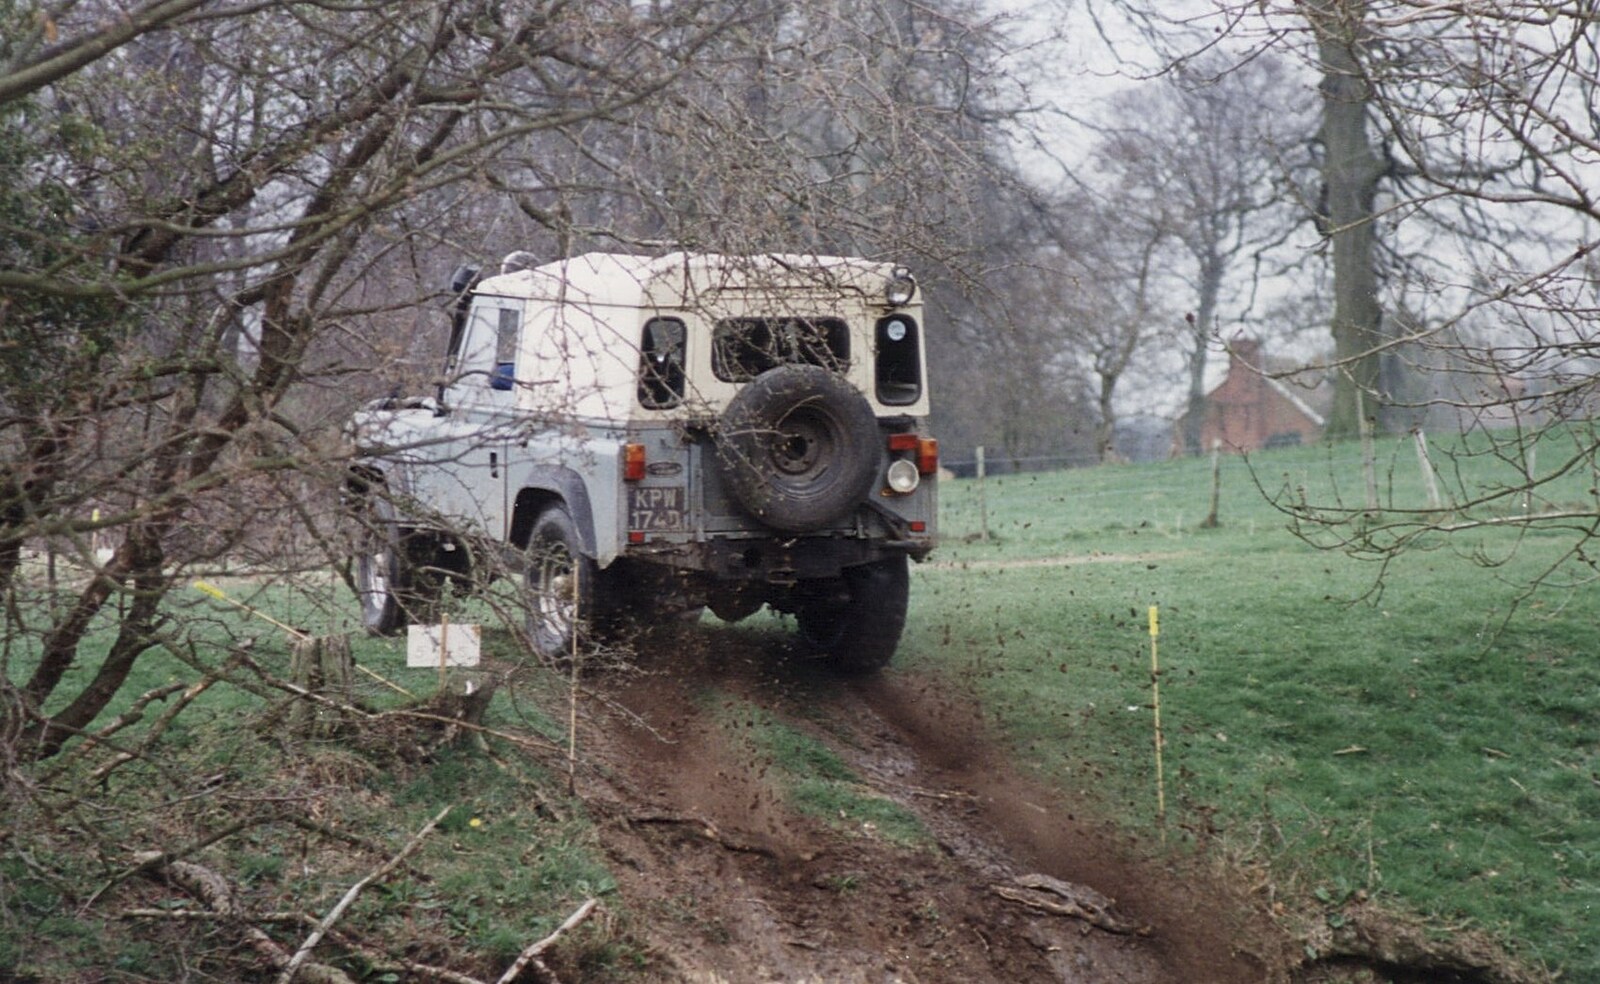 A Land-Rover does some off-roading somwhere from Bernie and the Porch, The Stables, Stuston, Suffolk - 15th March 1991